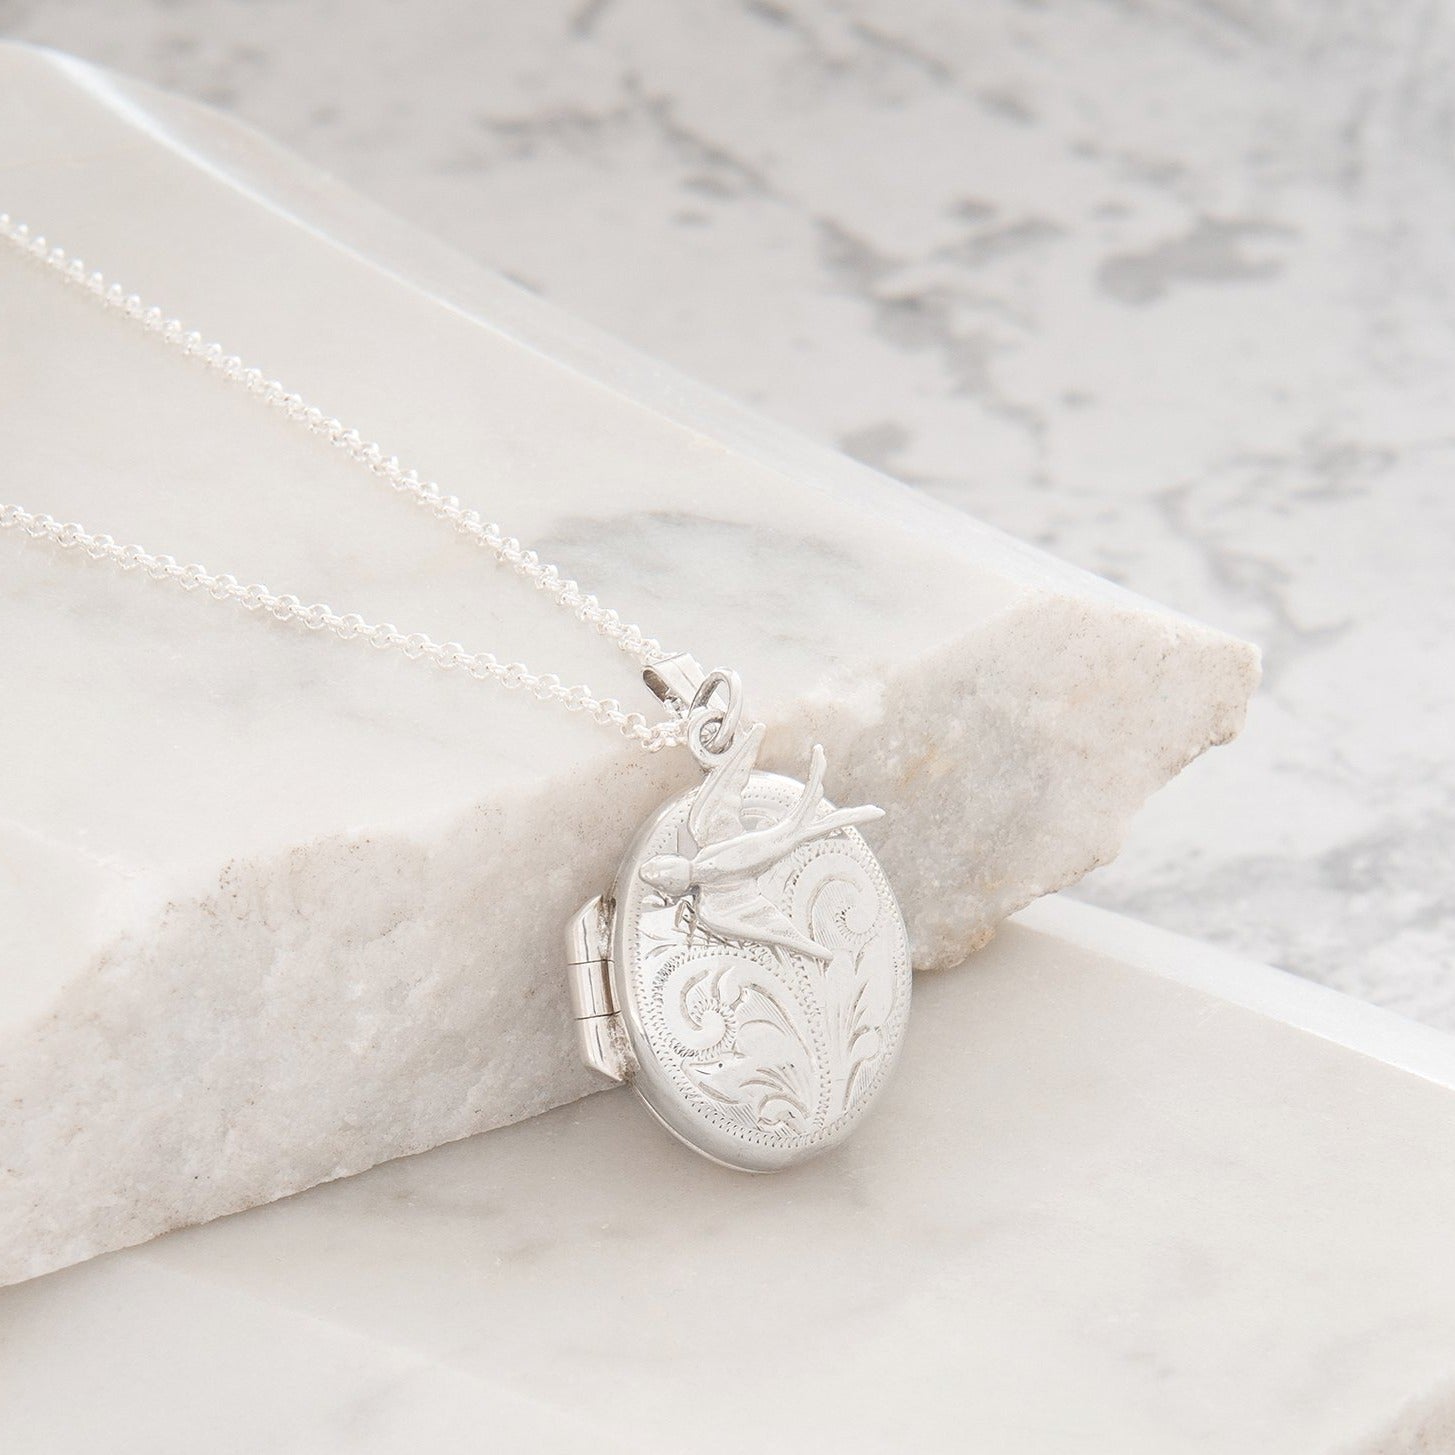 Personalised Engraved Oval Locket Necklace with Swallow - Sterling Silver